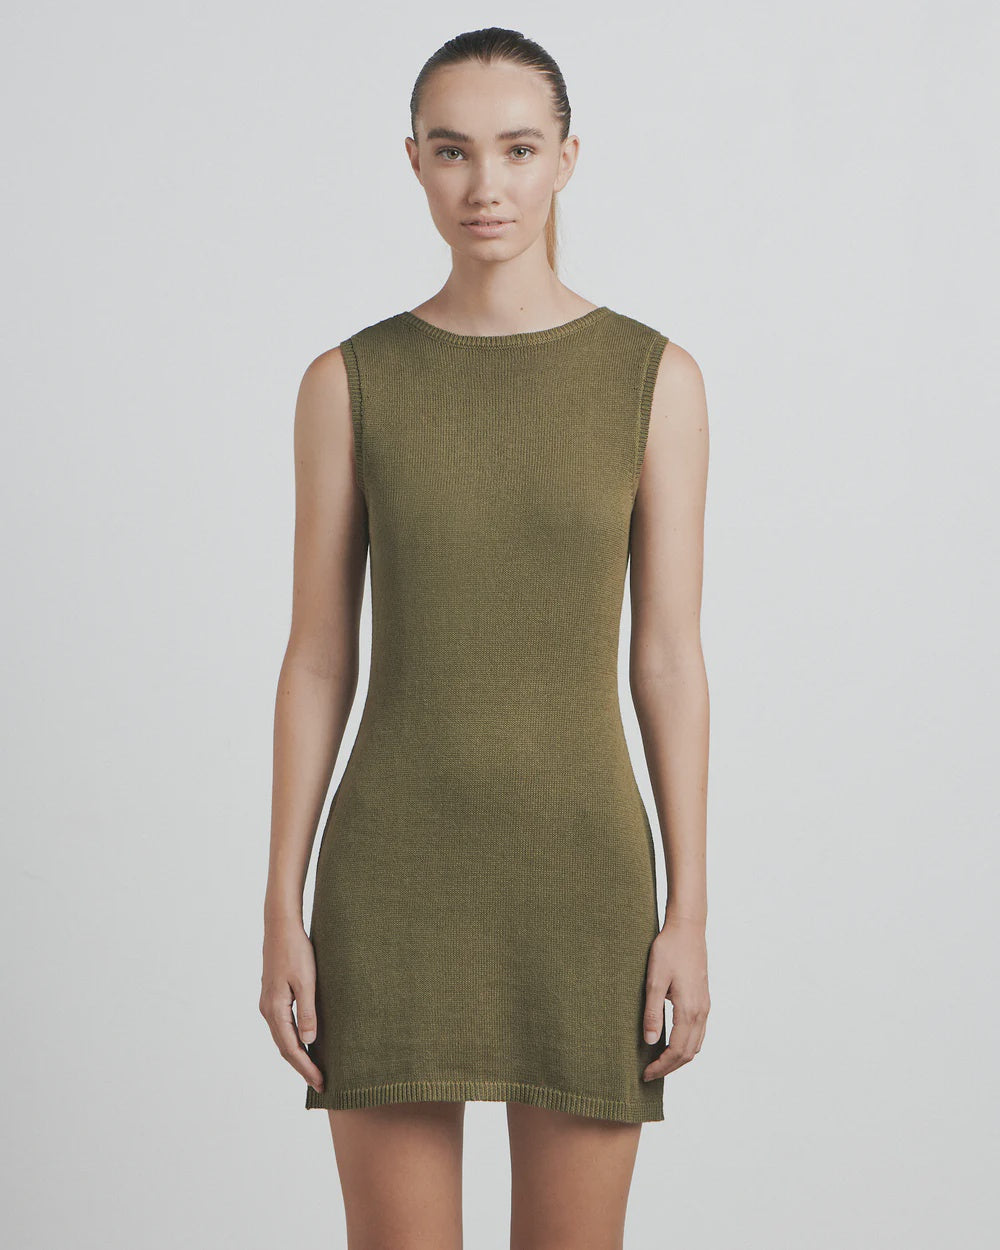 the knitted mini dress | nutmeg | bare by charlie holiday